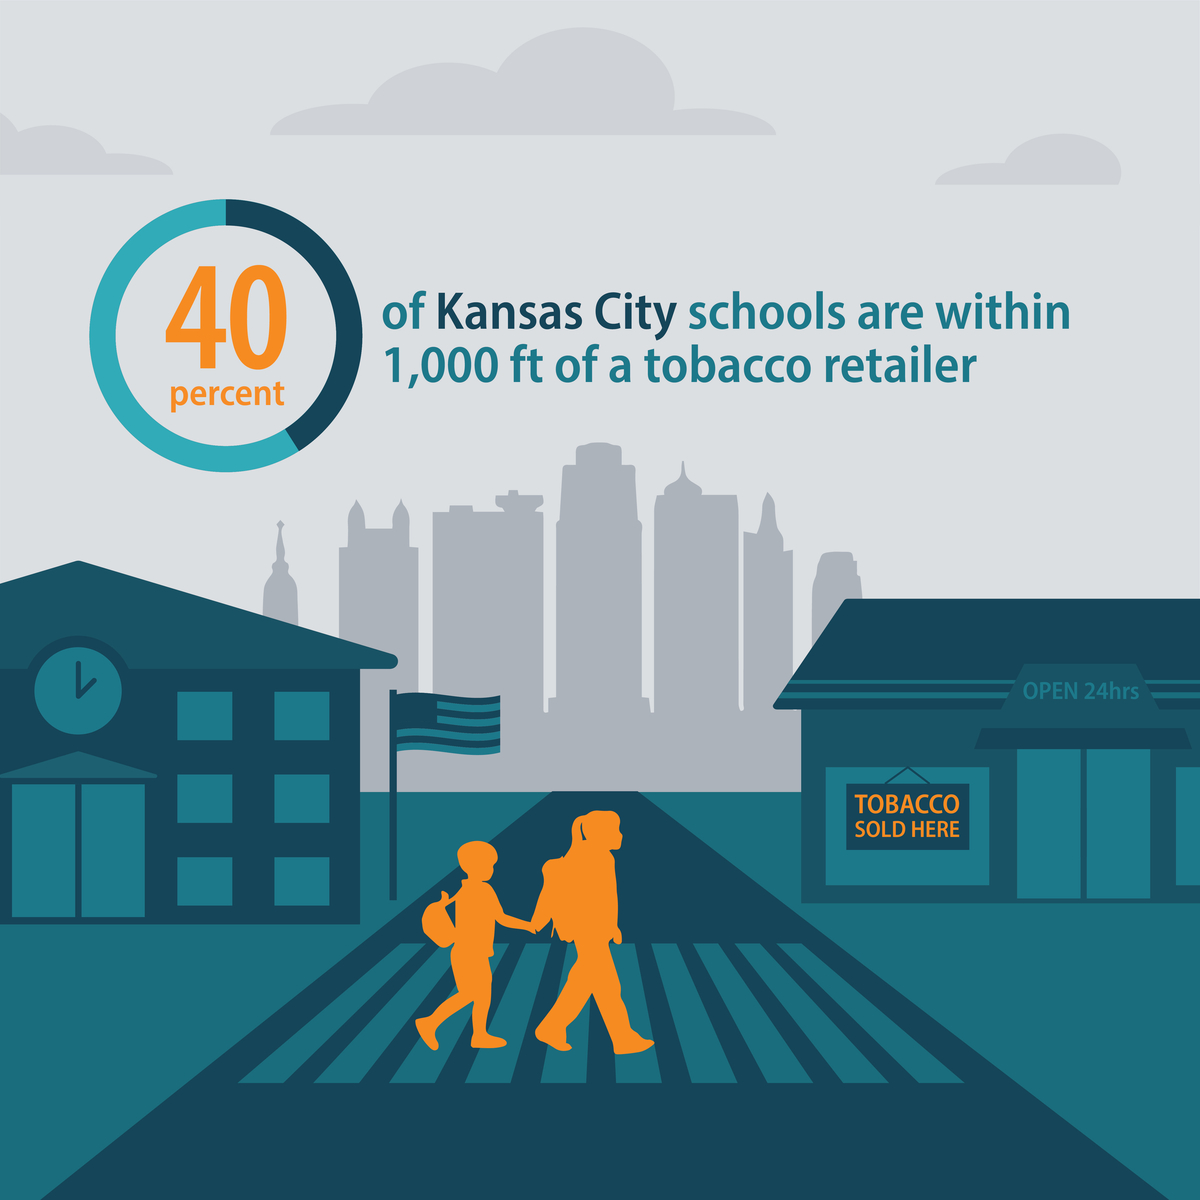 40 percent of Kansas City schools are within 1,000 feet of a tobacco retailer